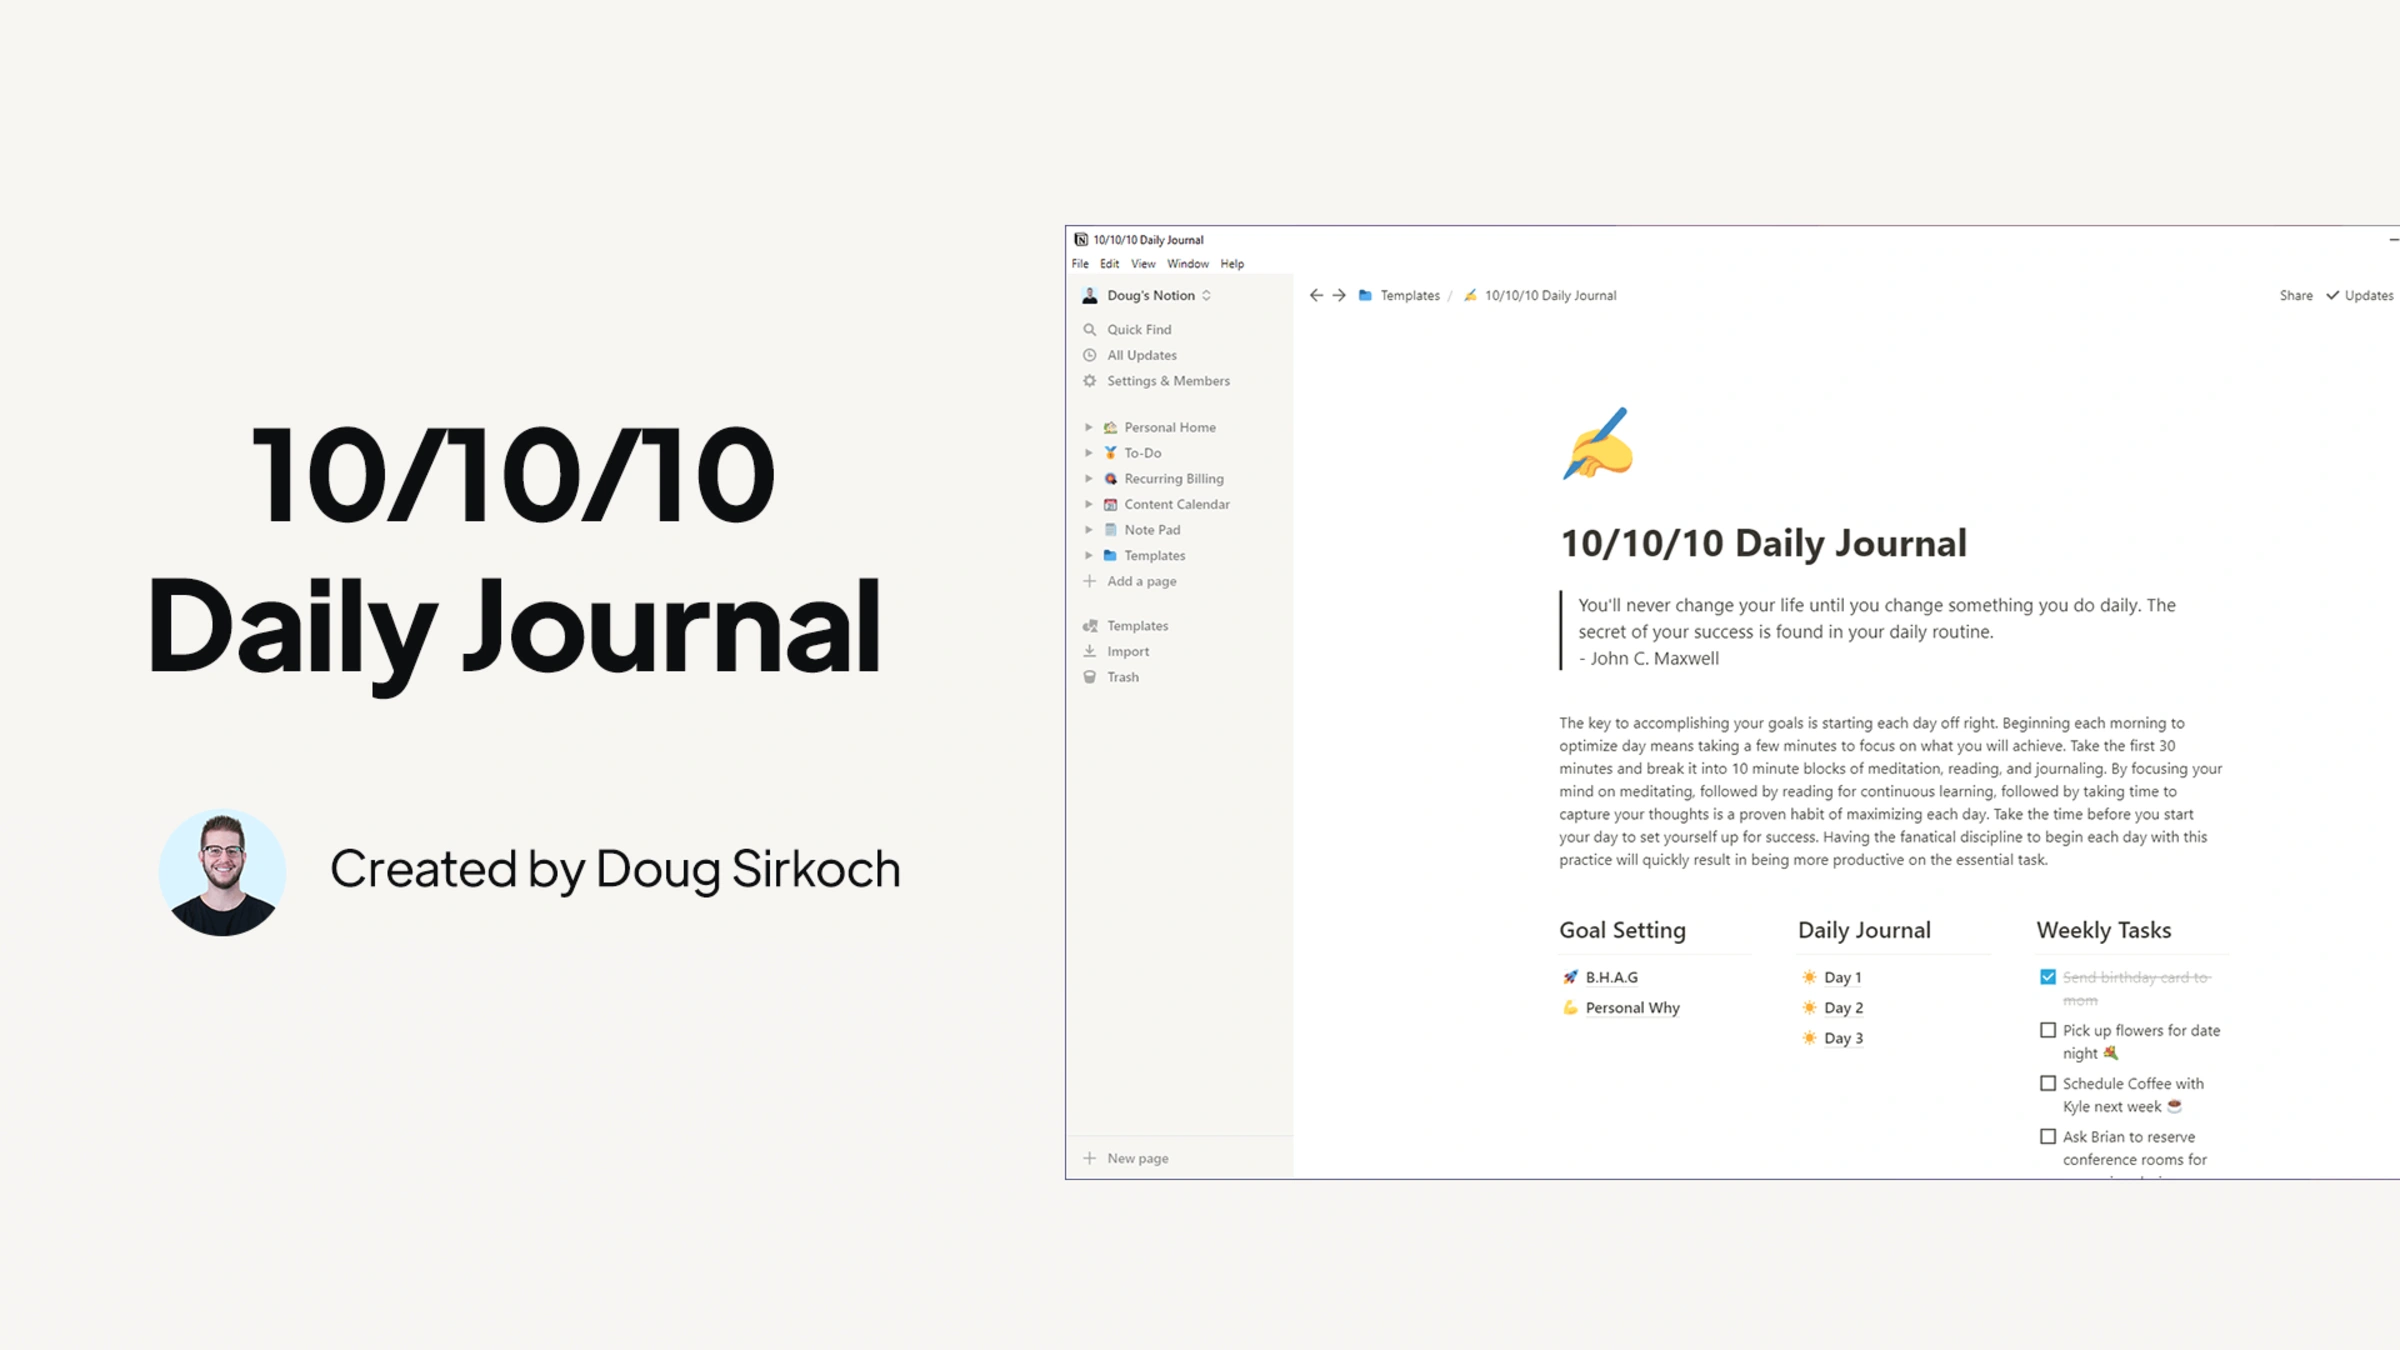 10/10/10 Daily Journal